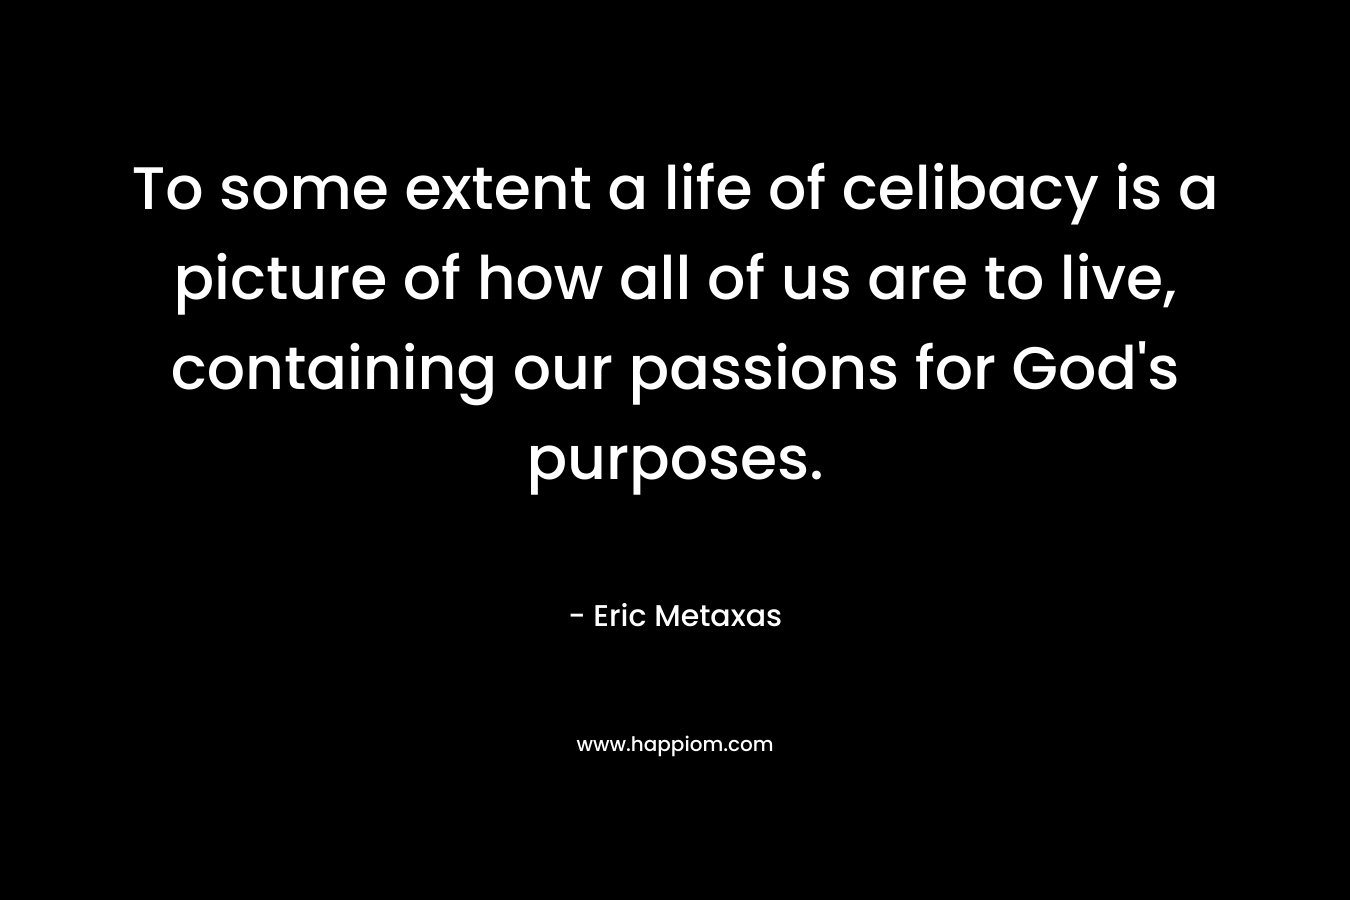 To some extent a life of celibacy is a picture of how all of us are to live, containing our passions for God's purposes.